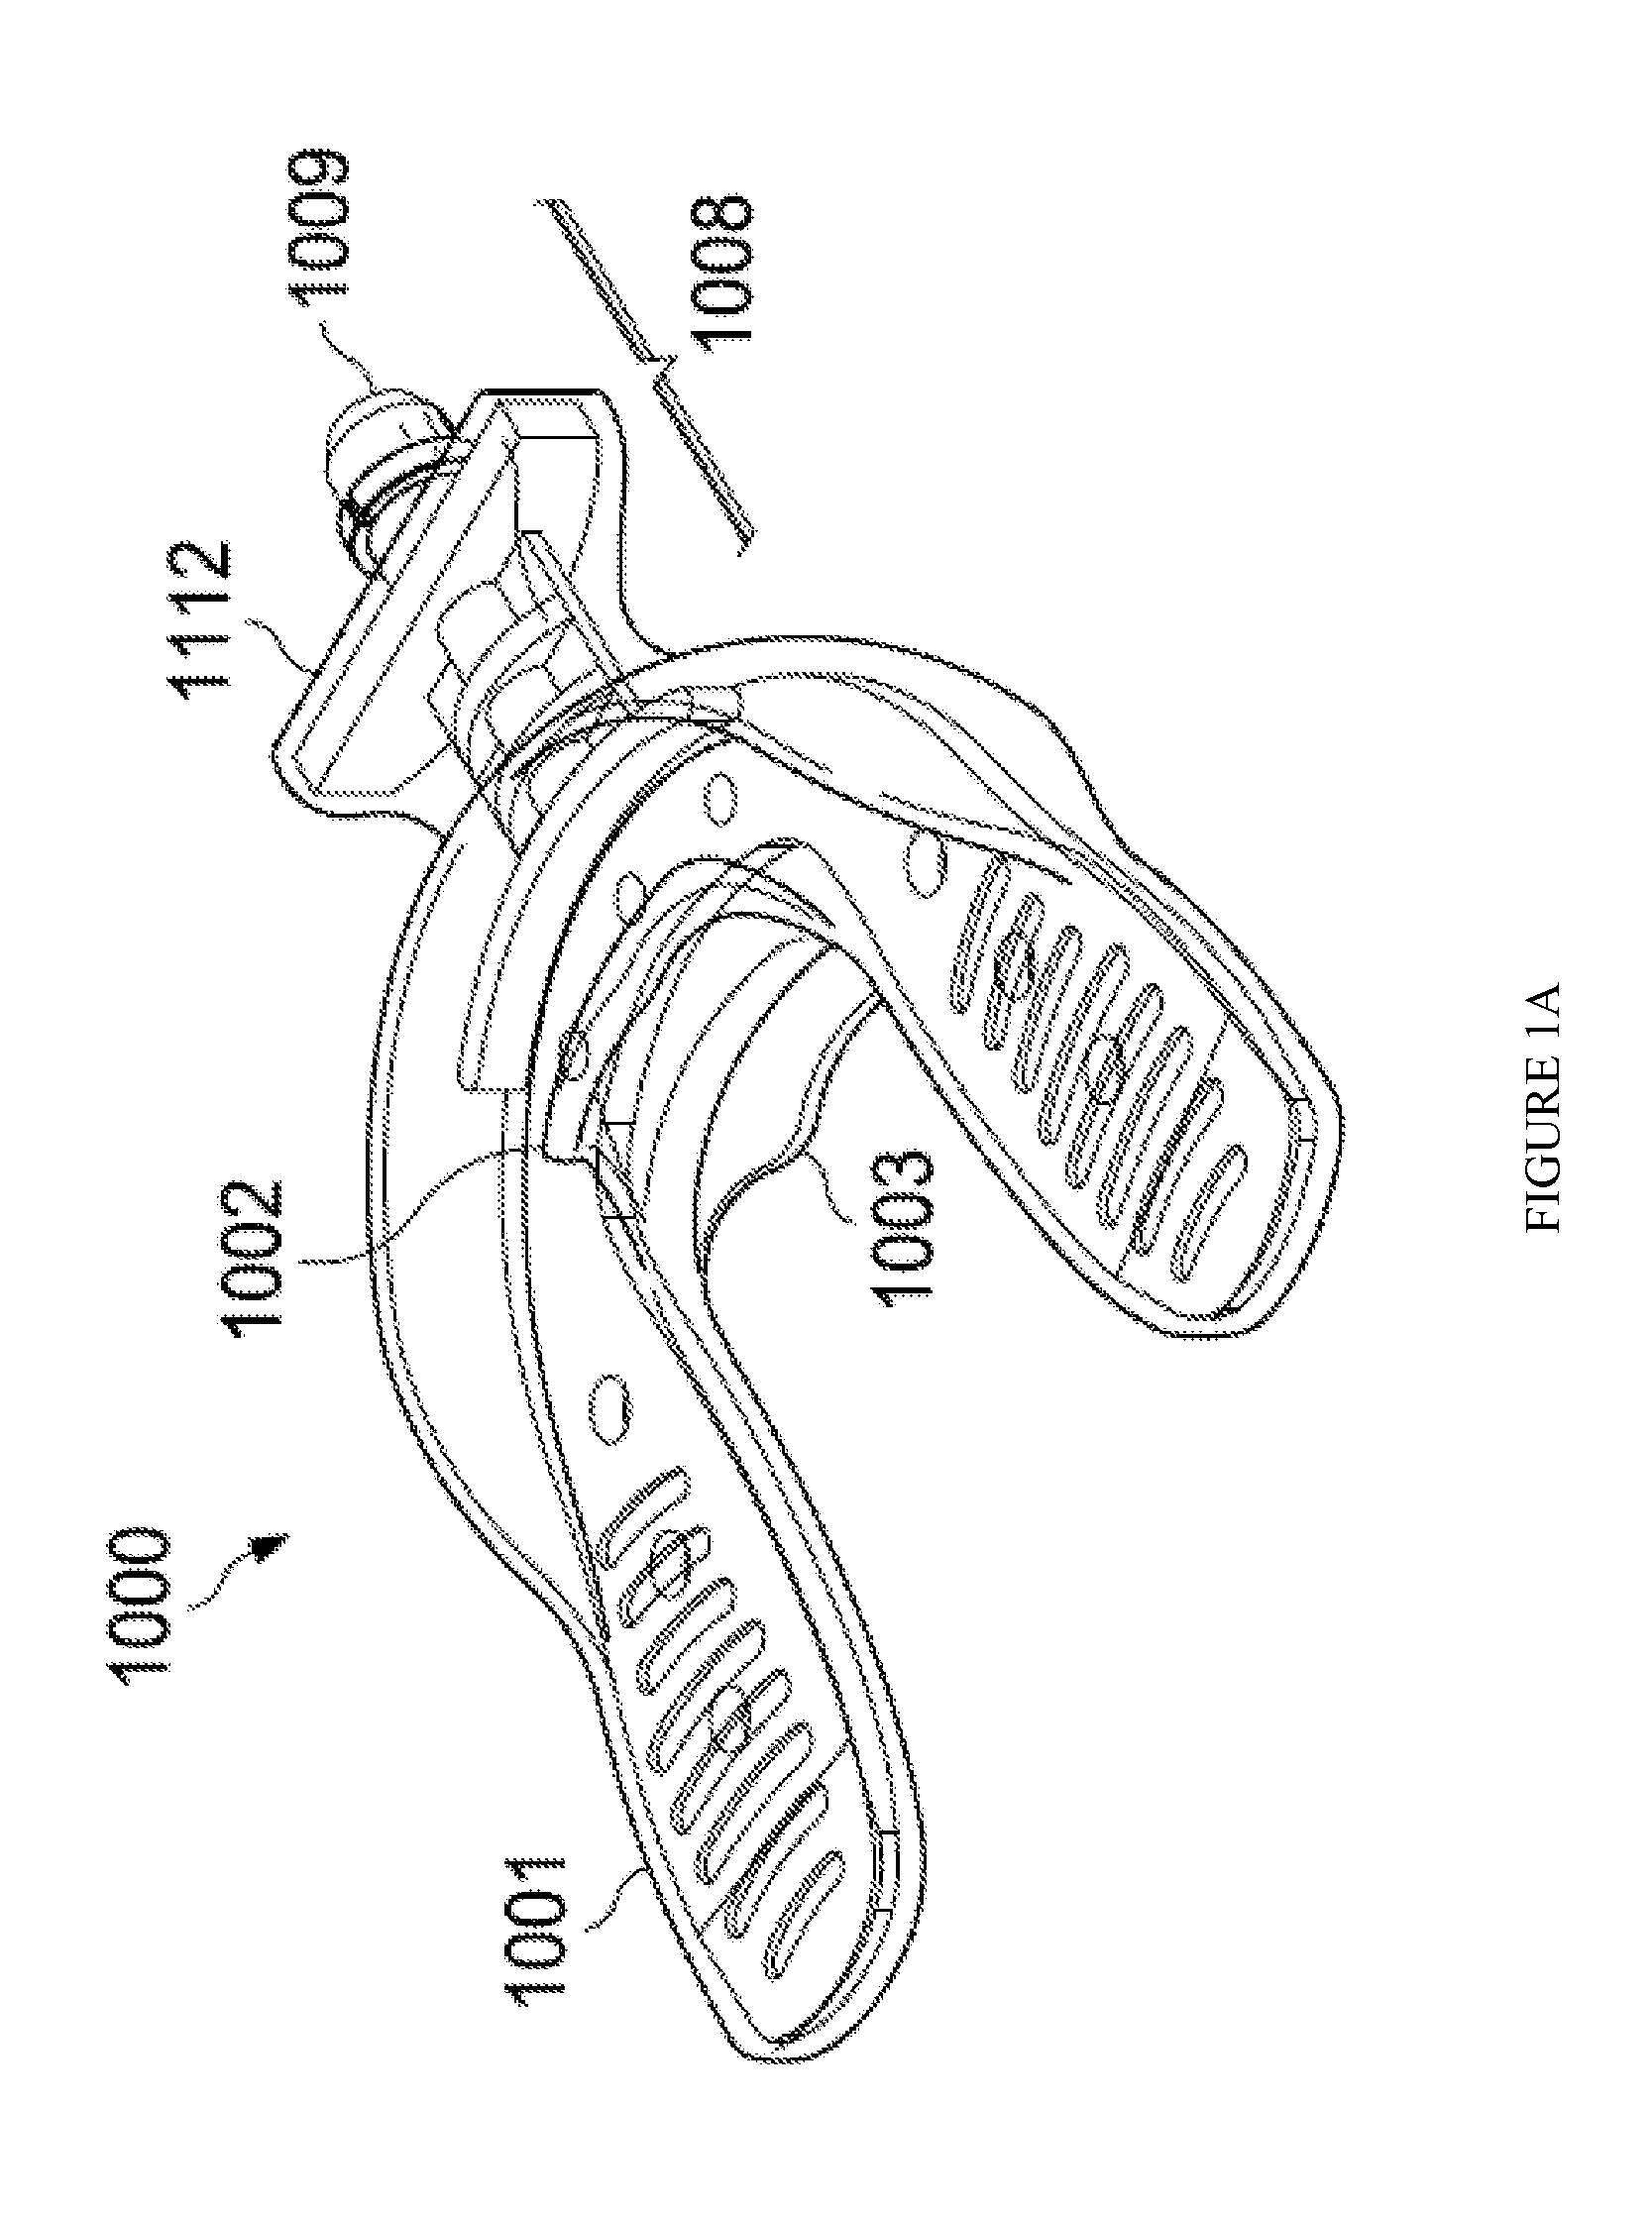 Light cure bite plate for orthodontic remodeling devices